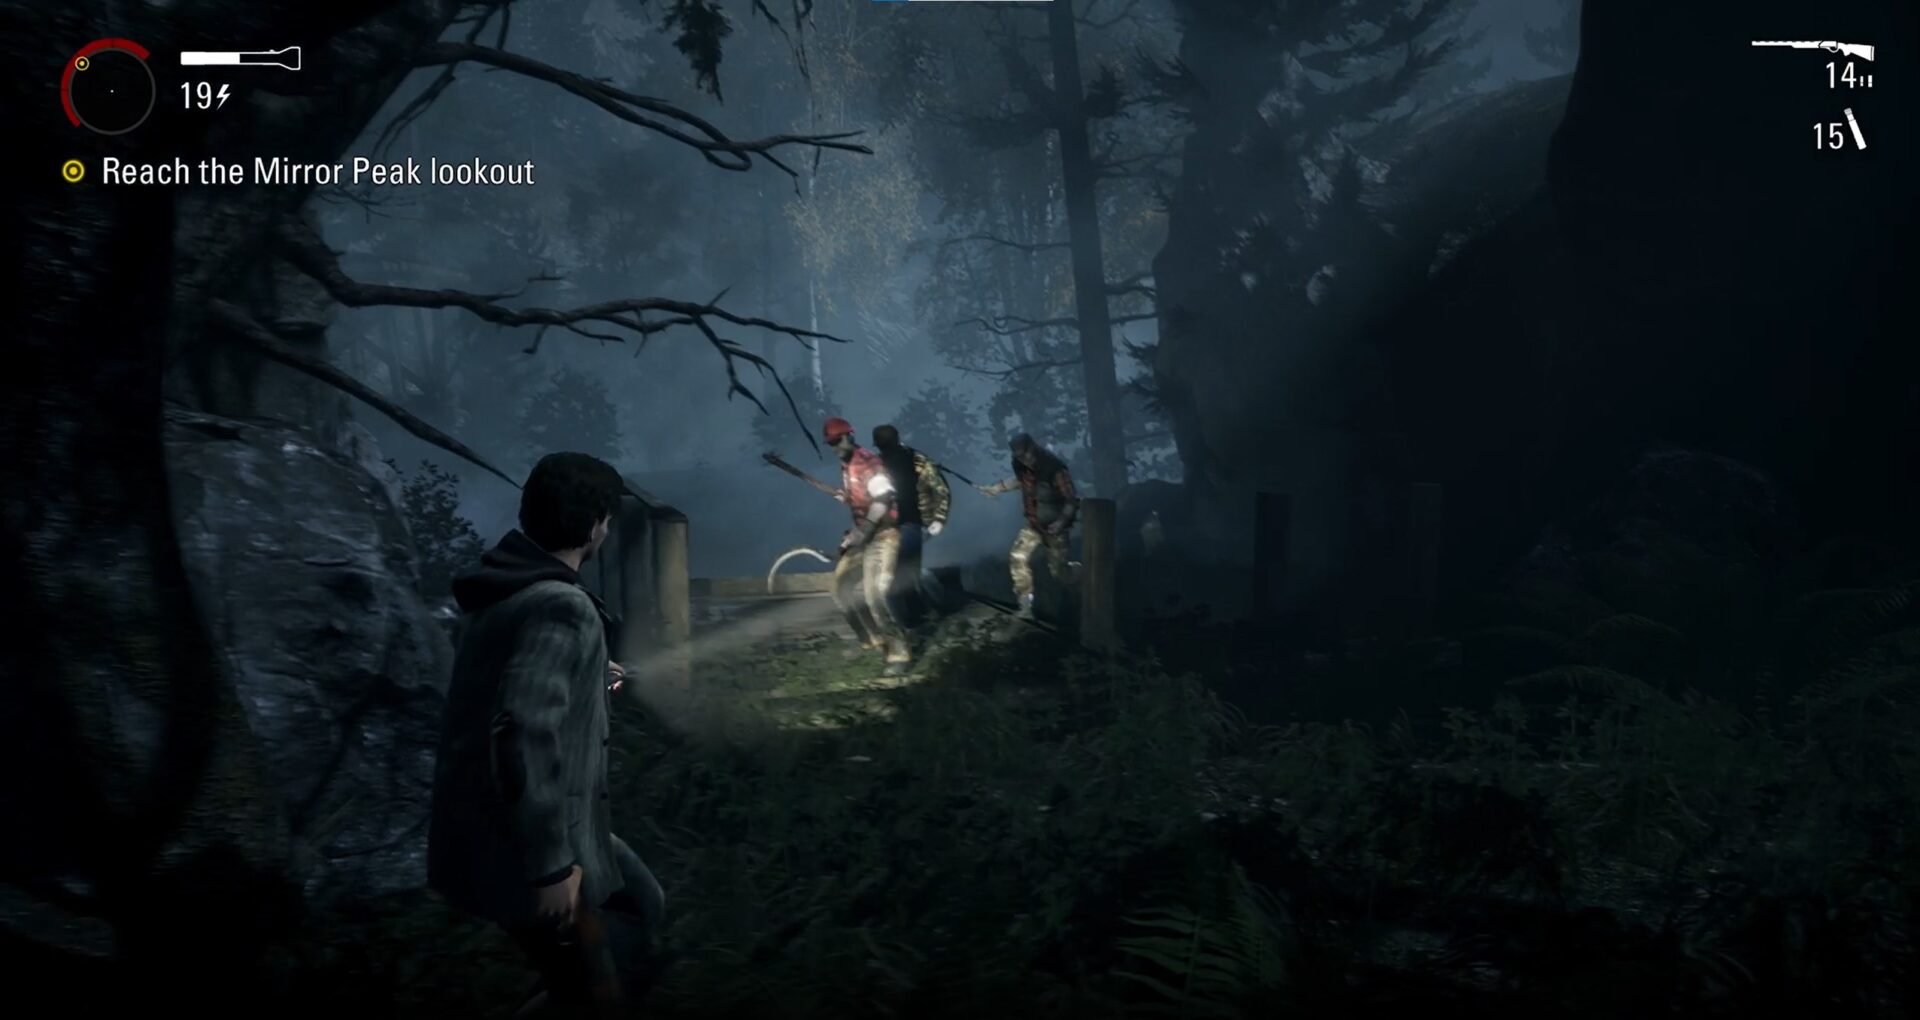 Judging a Book by Its Cover: The Making of Alan Wake Remastered - Xbox Wire